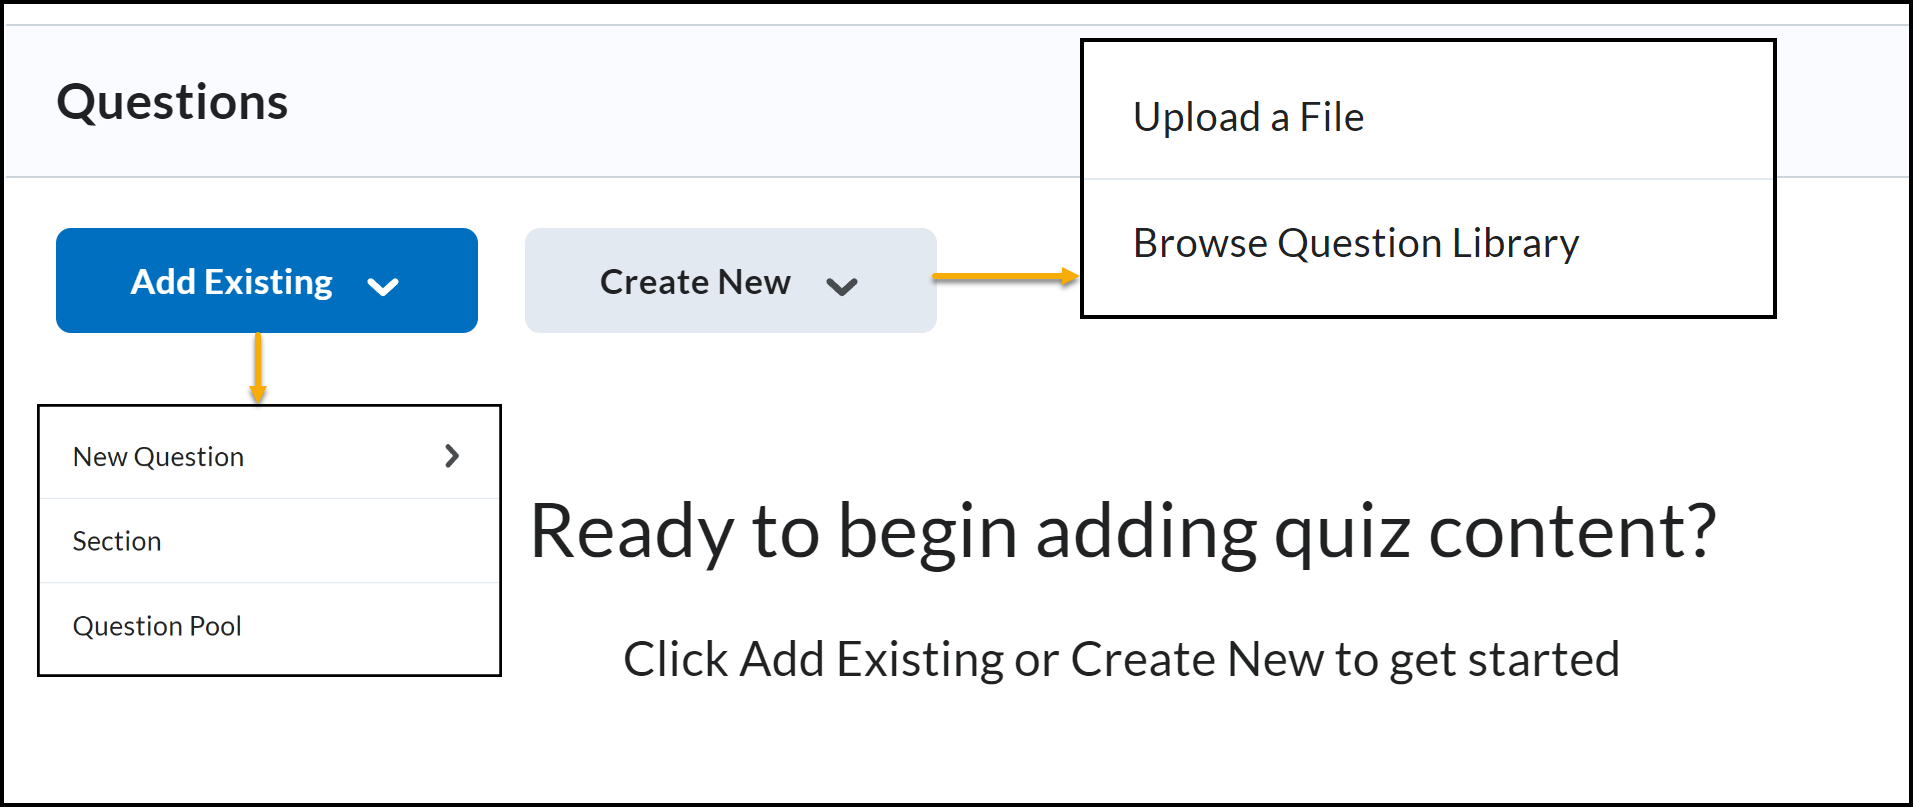 Questions: Add Existing or Create New buttons with expanded menus for New Questions, Section, Pool, Upload and Browse Question Library